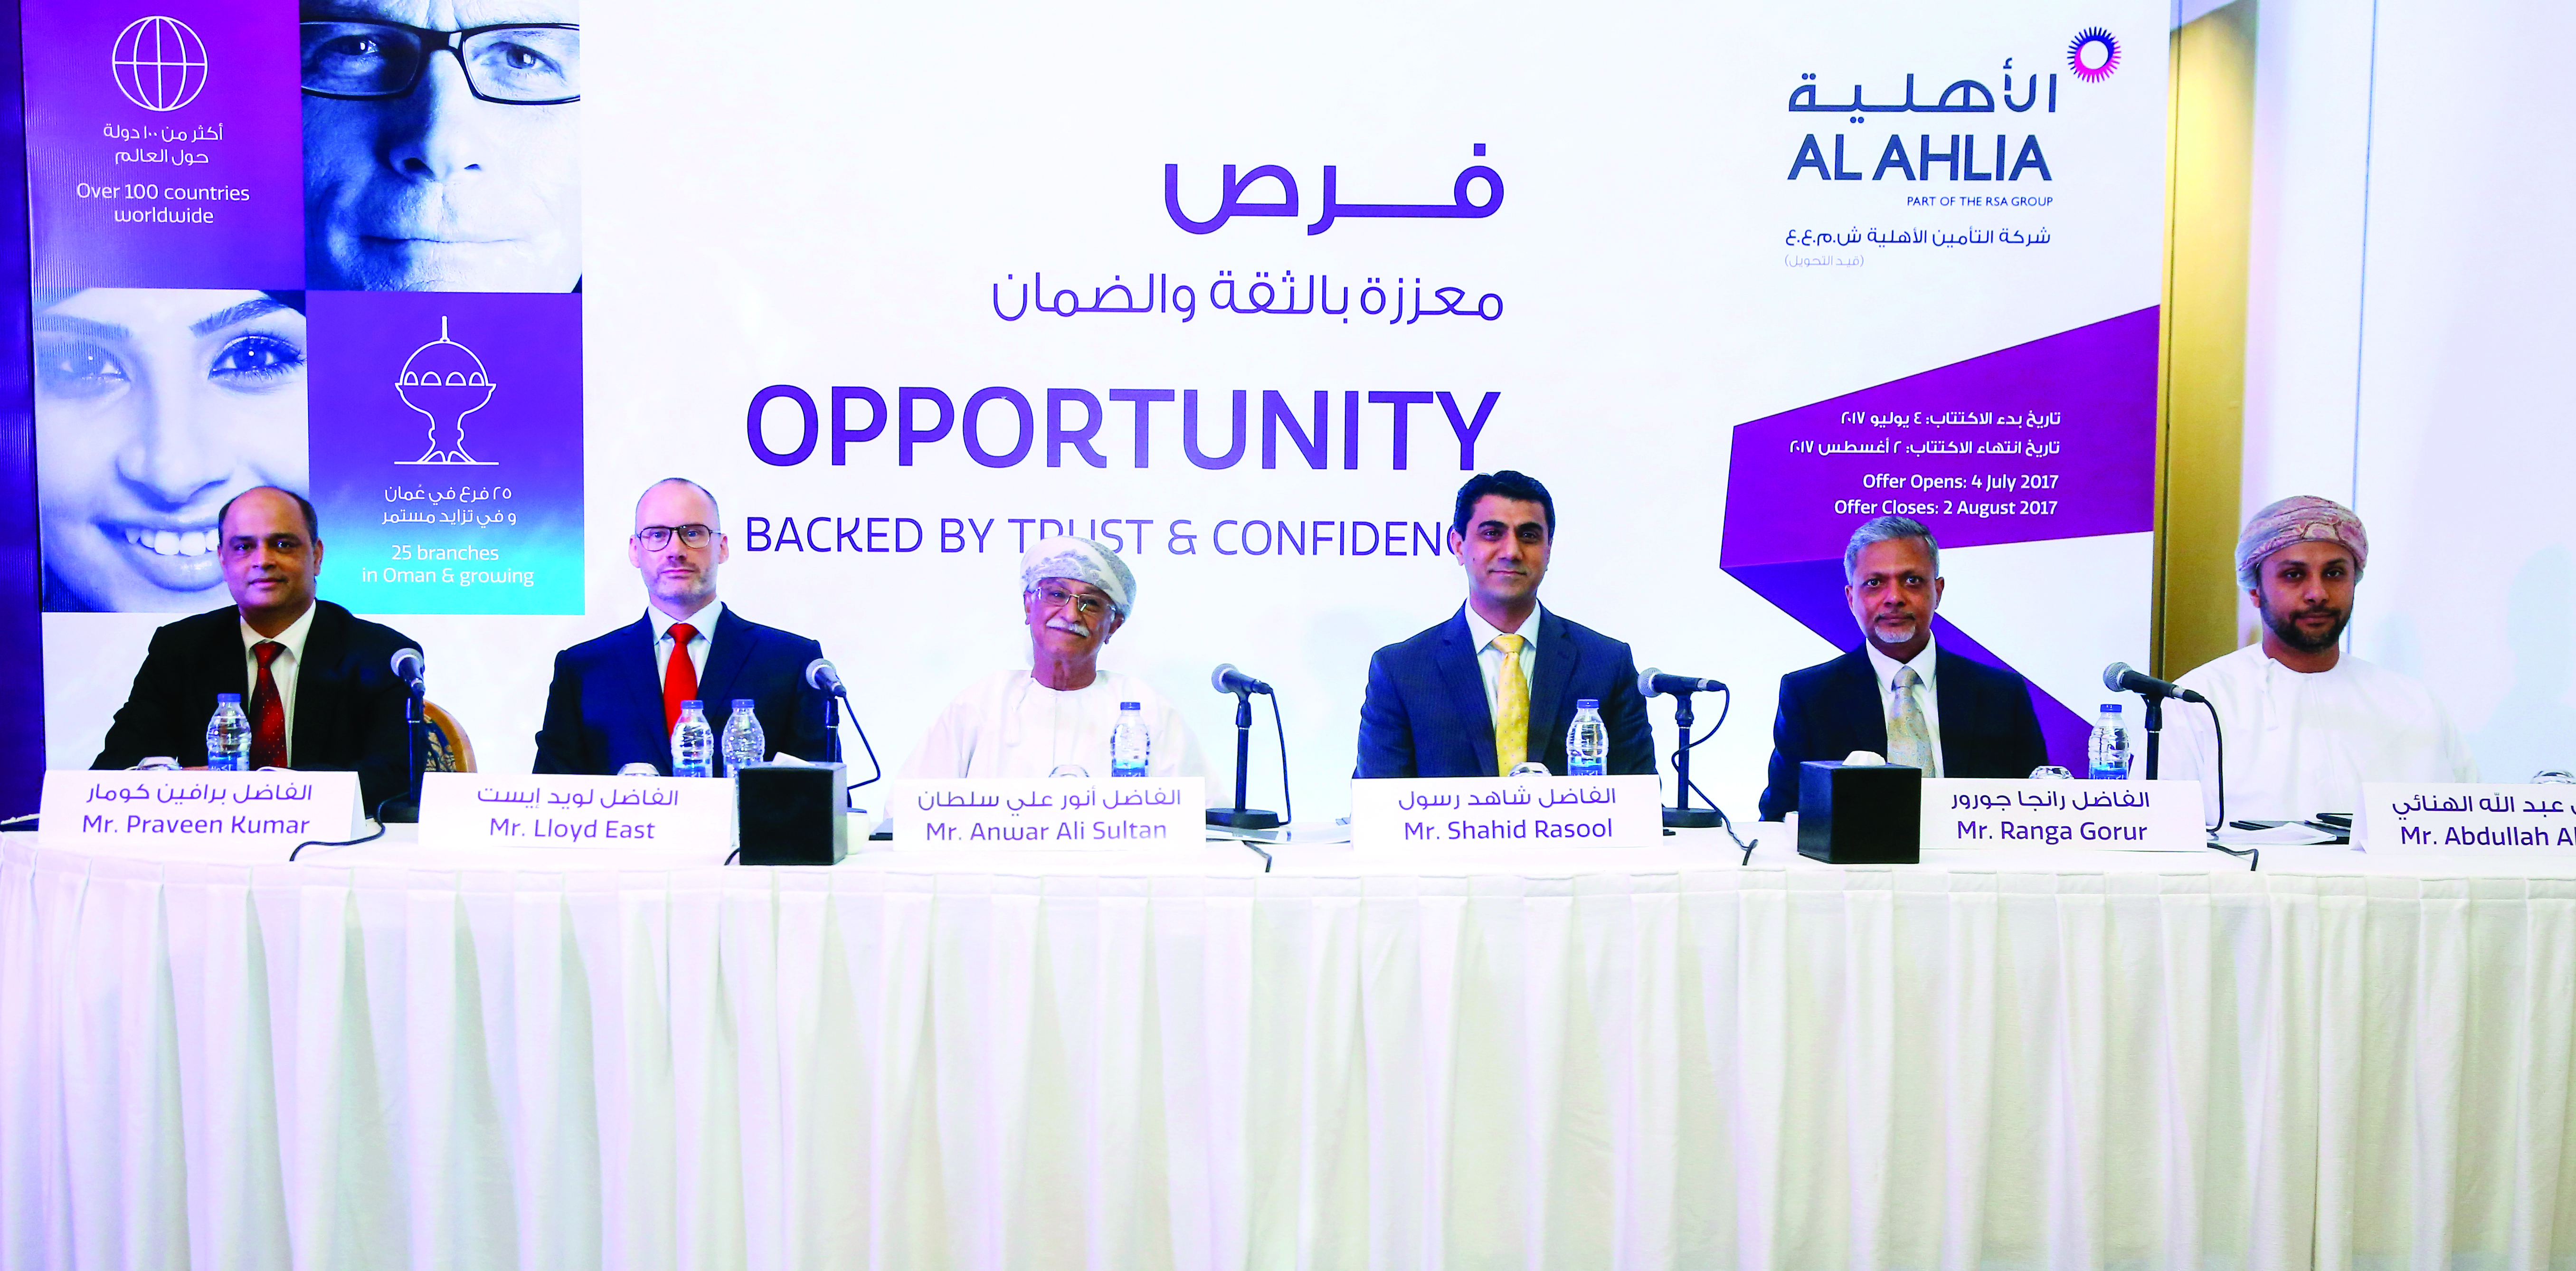 Al Ahlia Insurance to offer 9.3 per cent dividend yield, shares to be listed on August 17